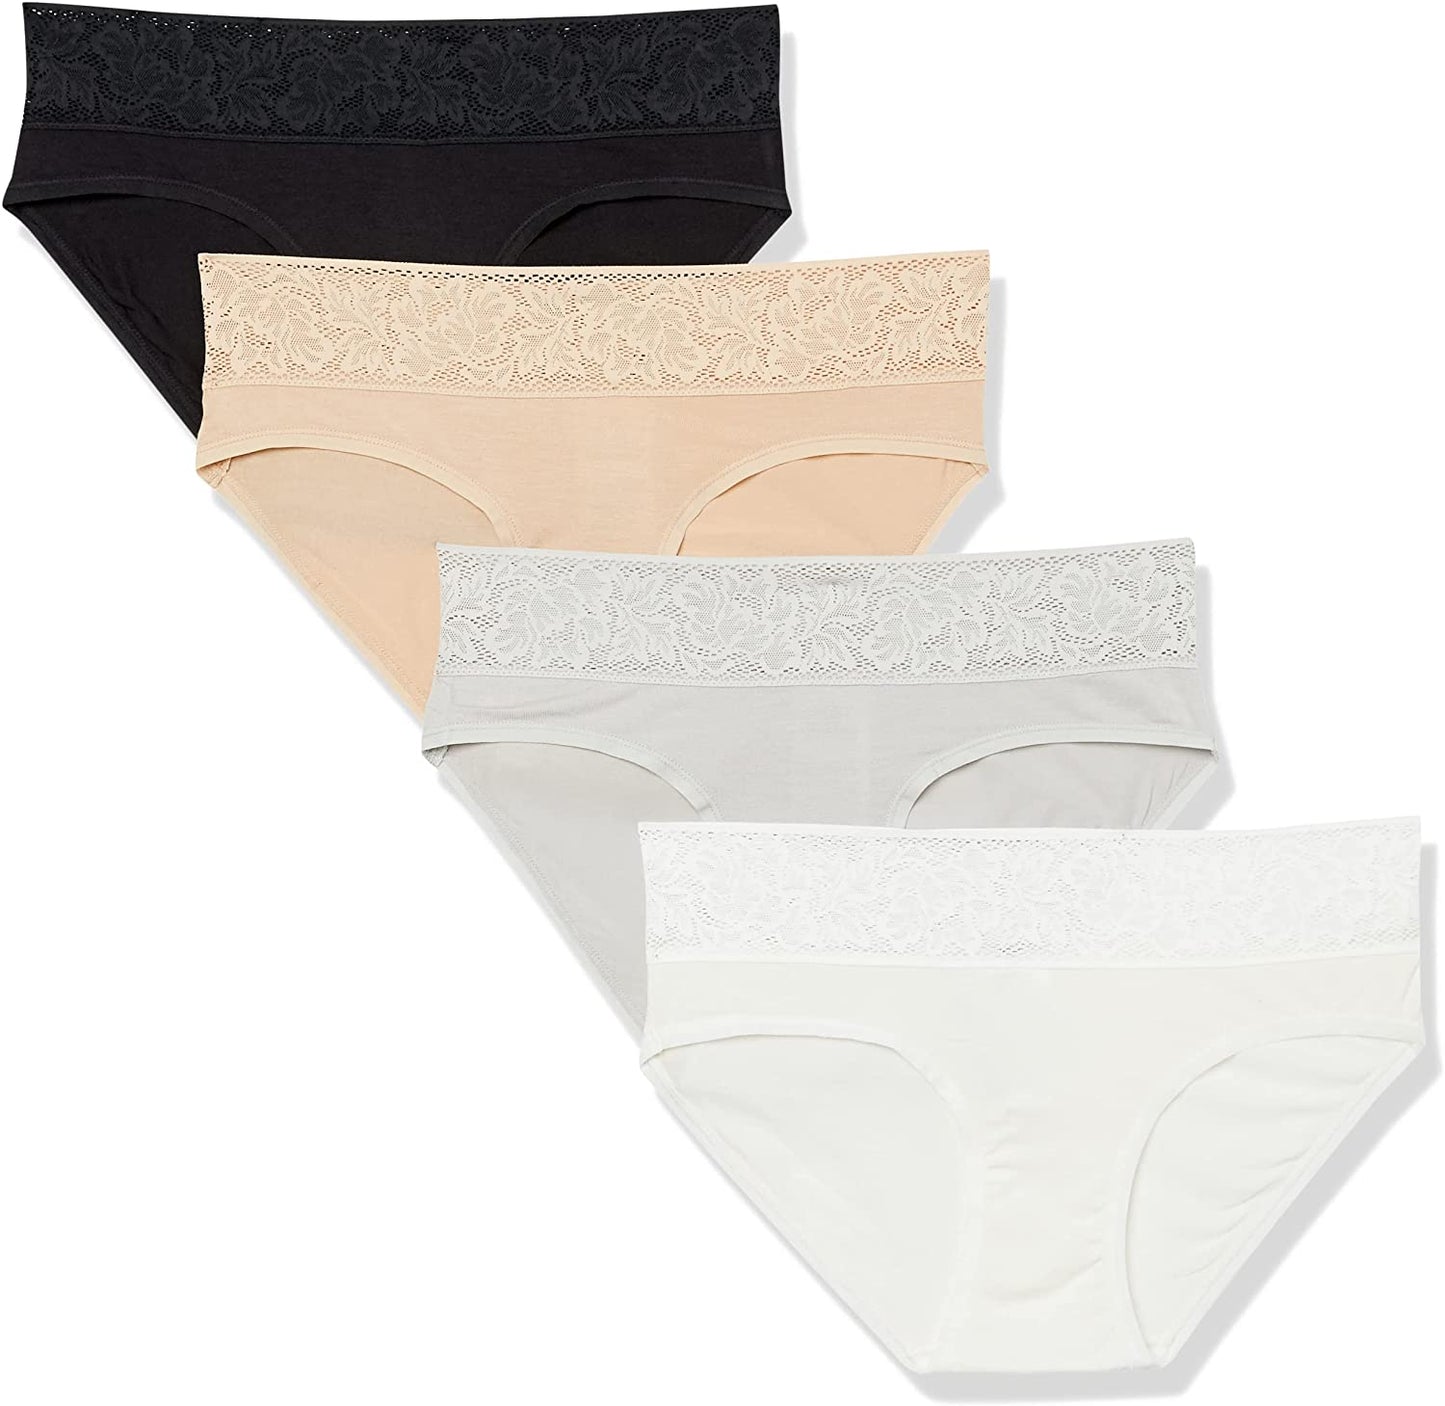 Essentials Women's Standard Modal with Lace Panty (Thong or Bikini), Pack of 4